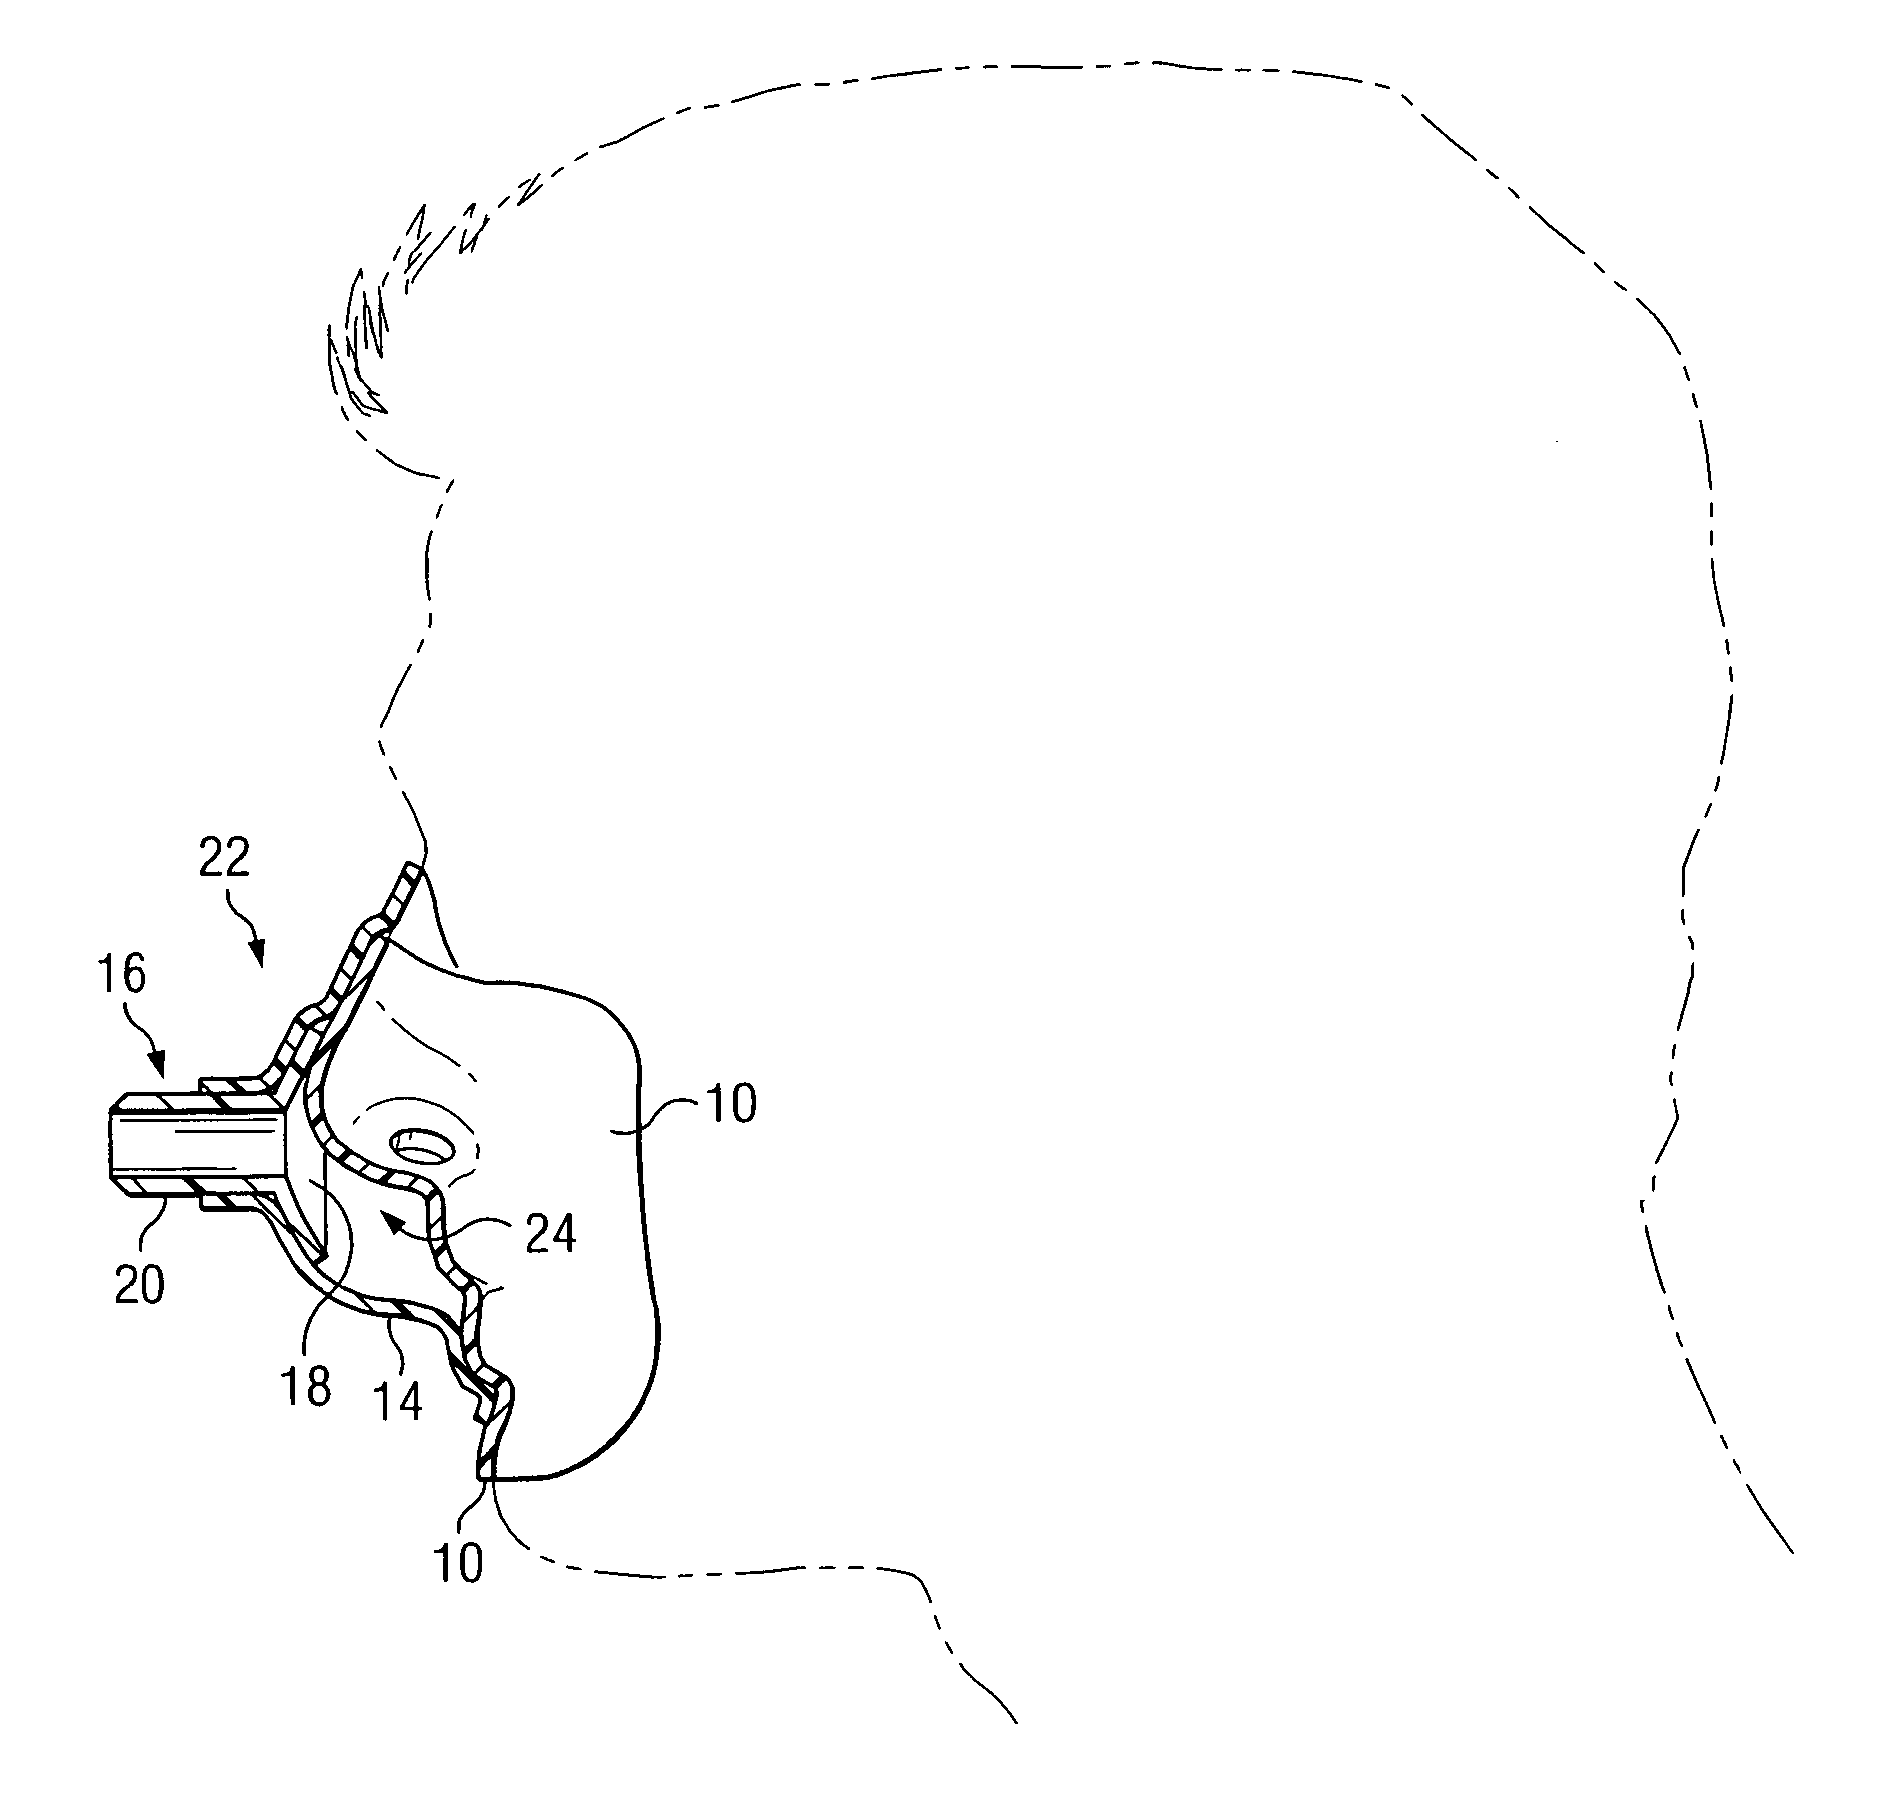 Custom fitted mask configured for coupling to an external gas supply system and method of forming same